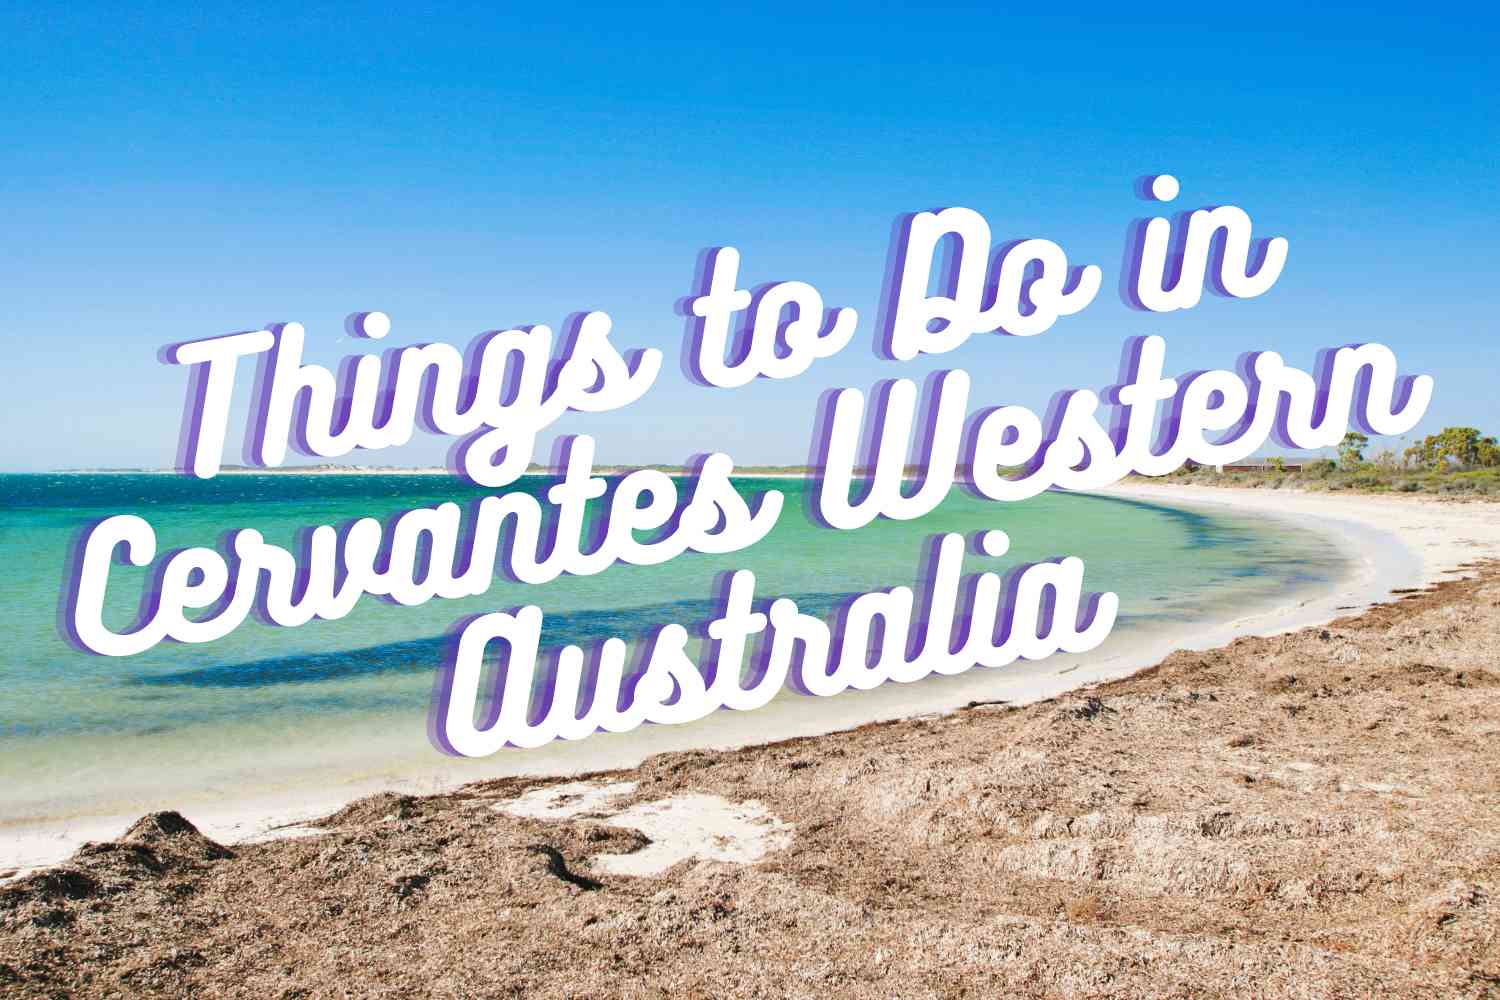 Things to do with kids in Cervantes Western Australia WA. Image shows a beach in the area